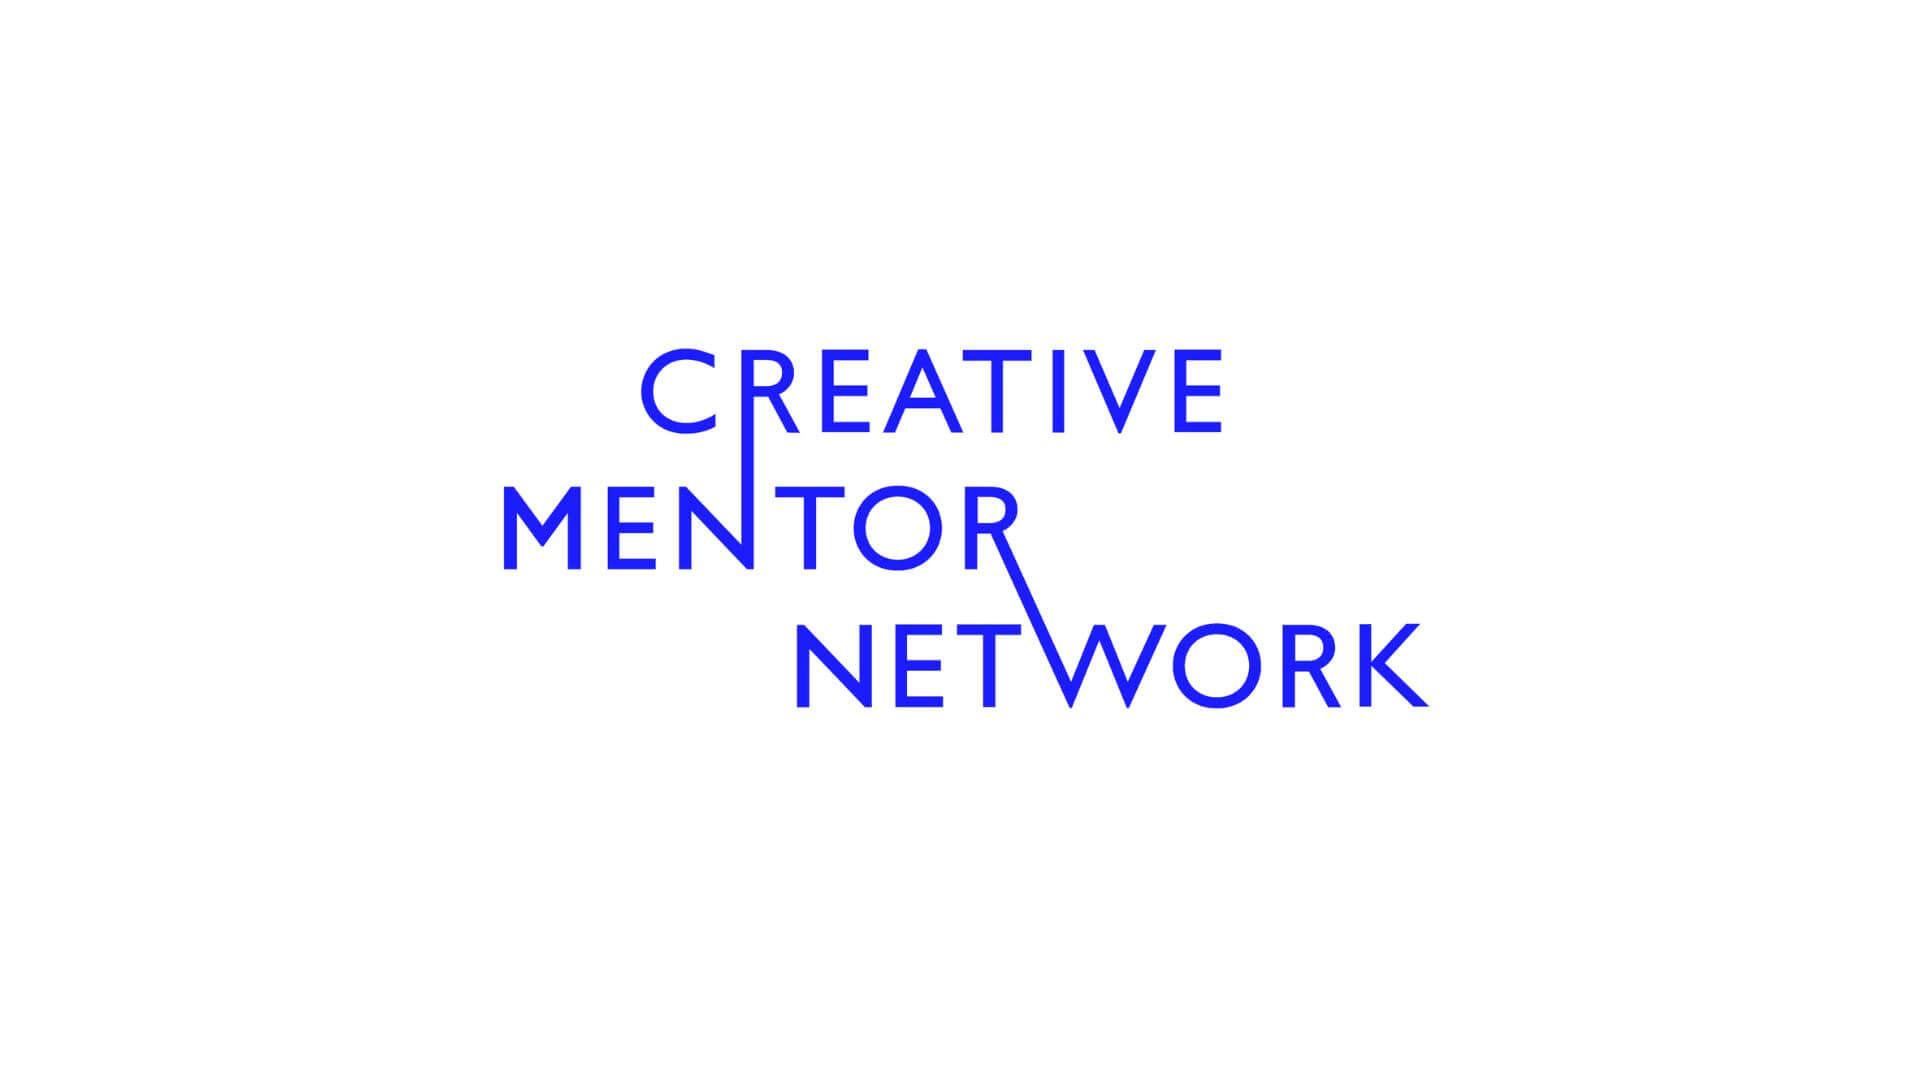 NM Productions Announces Partnership with Creative Mentor Network